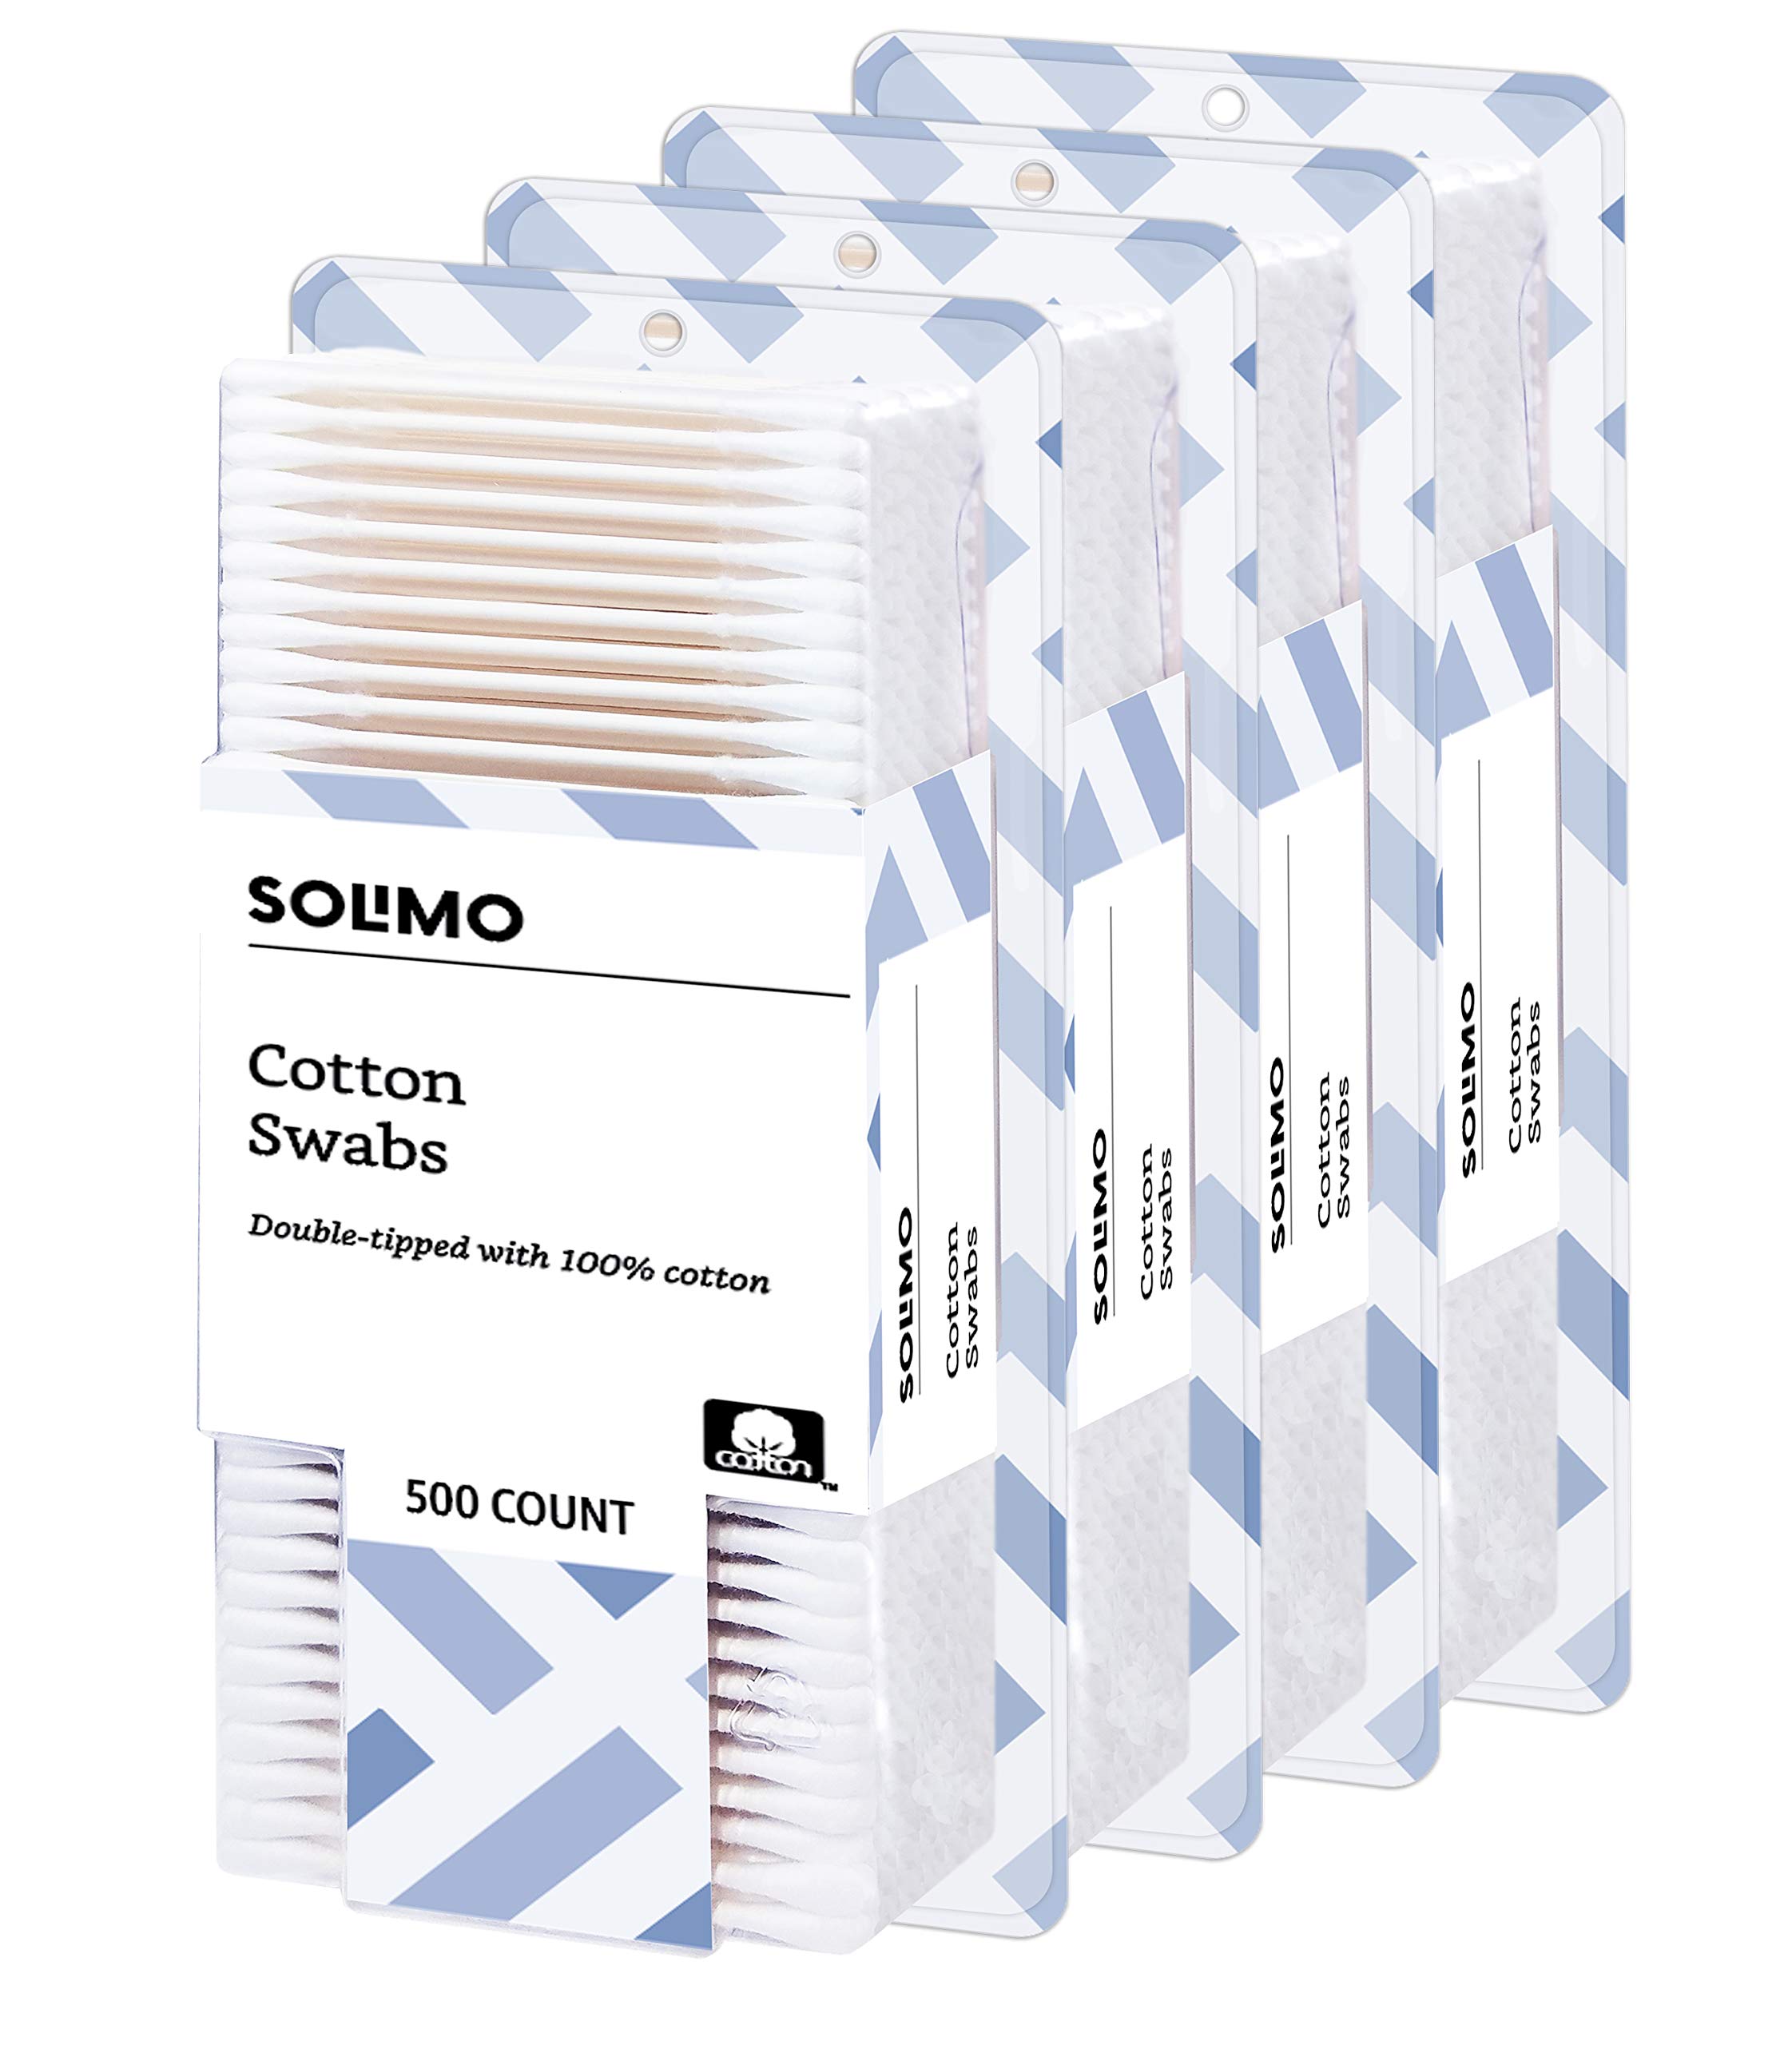 Amazon Brand - Solimo Cotton Swabs, 500ct (Pack of 4)